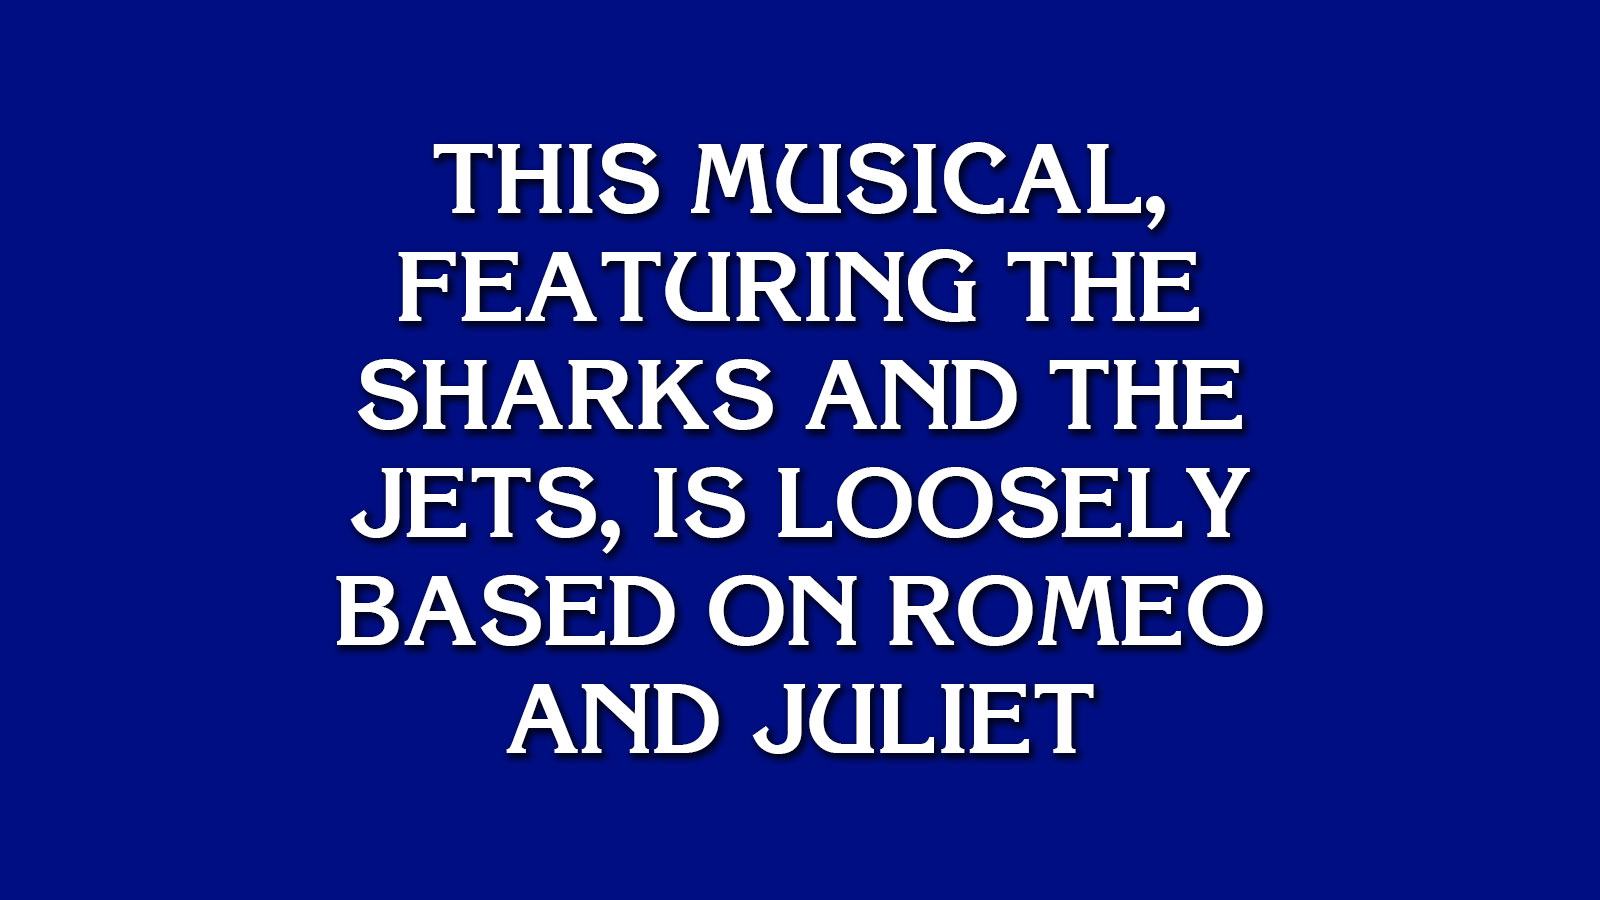 Can You Beat an Easy Game of “Jeopardy!”? 159